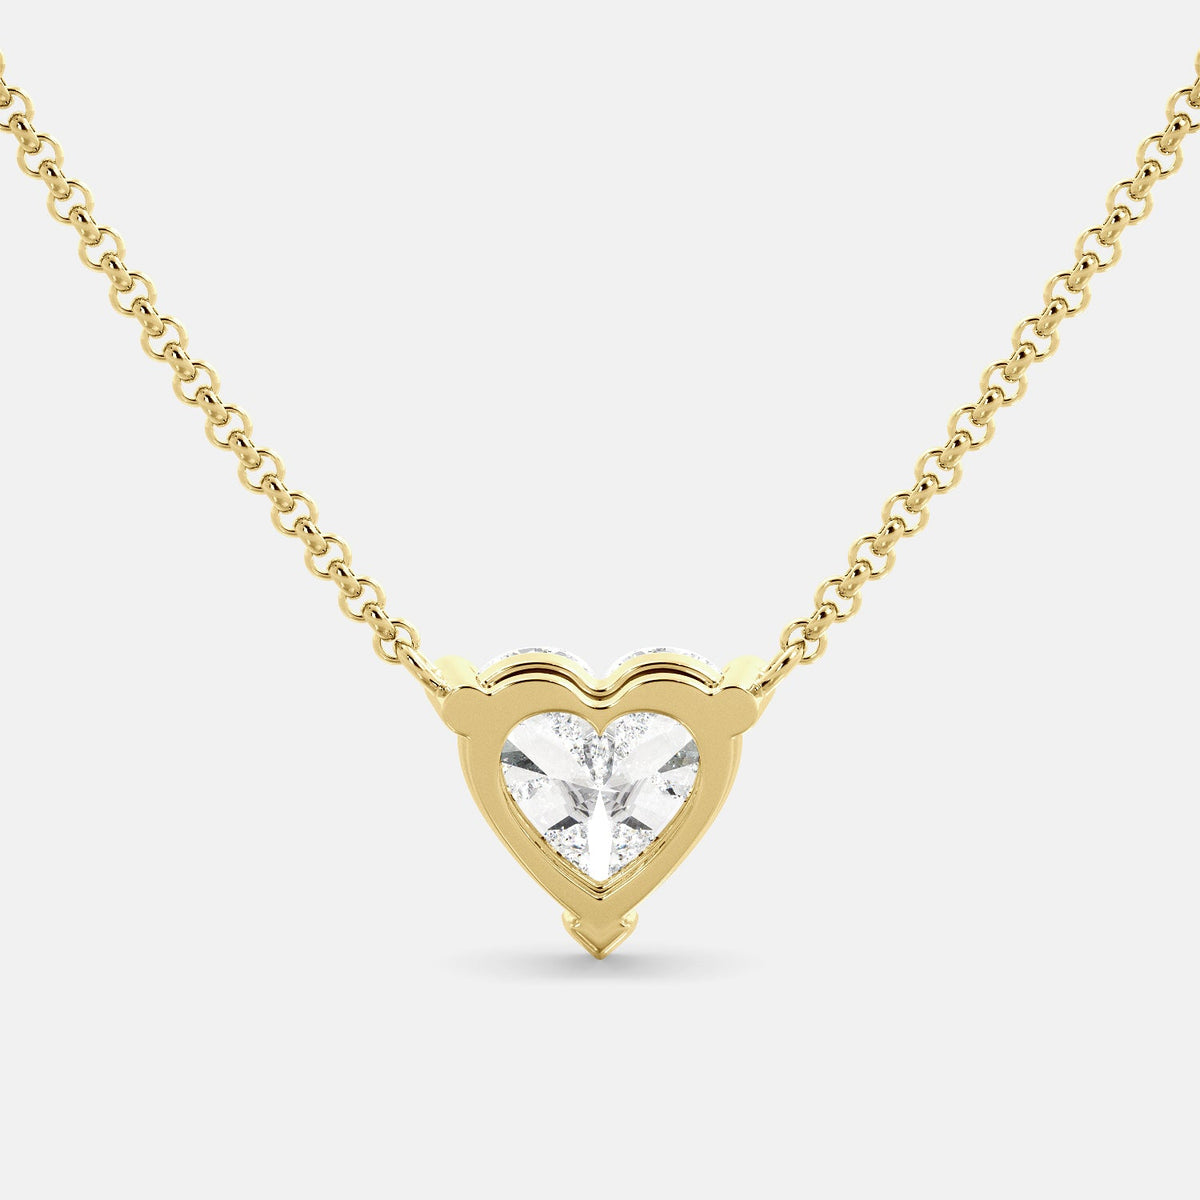 A close-up of a heart-shaped diamond necklace in recycled yellow gold. The necklace is set with a single heart-shaped diamond in the center of a pendant. The necklace is made of recycled yellow gold and has a simple, elegant design. The diamond is sparkling and reflects light beautifully. The necklace is a perfect gift for a loved one or a special occasion.